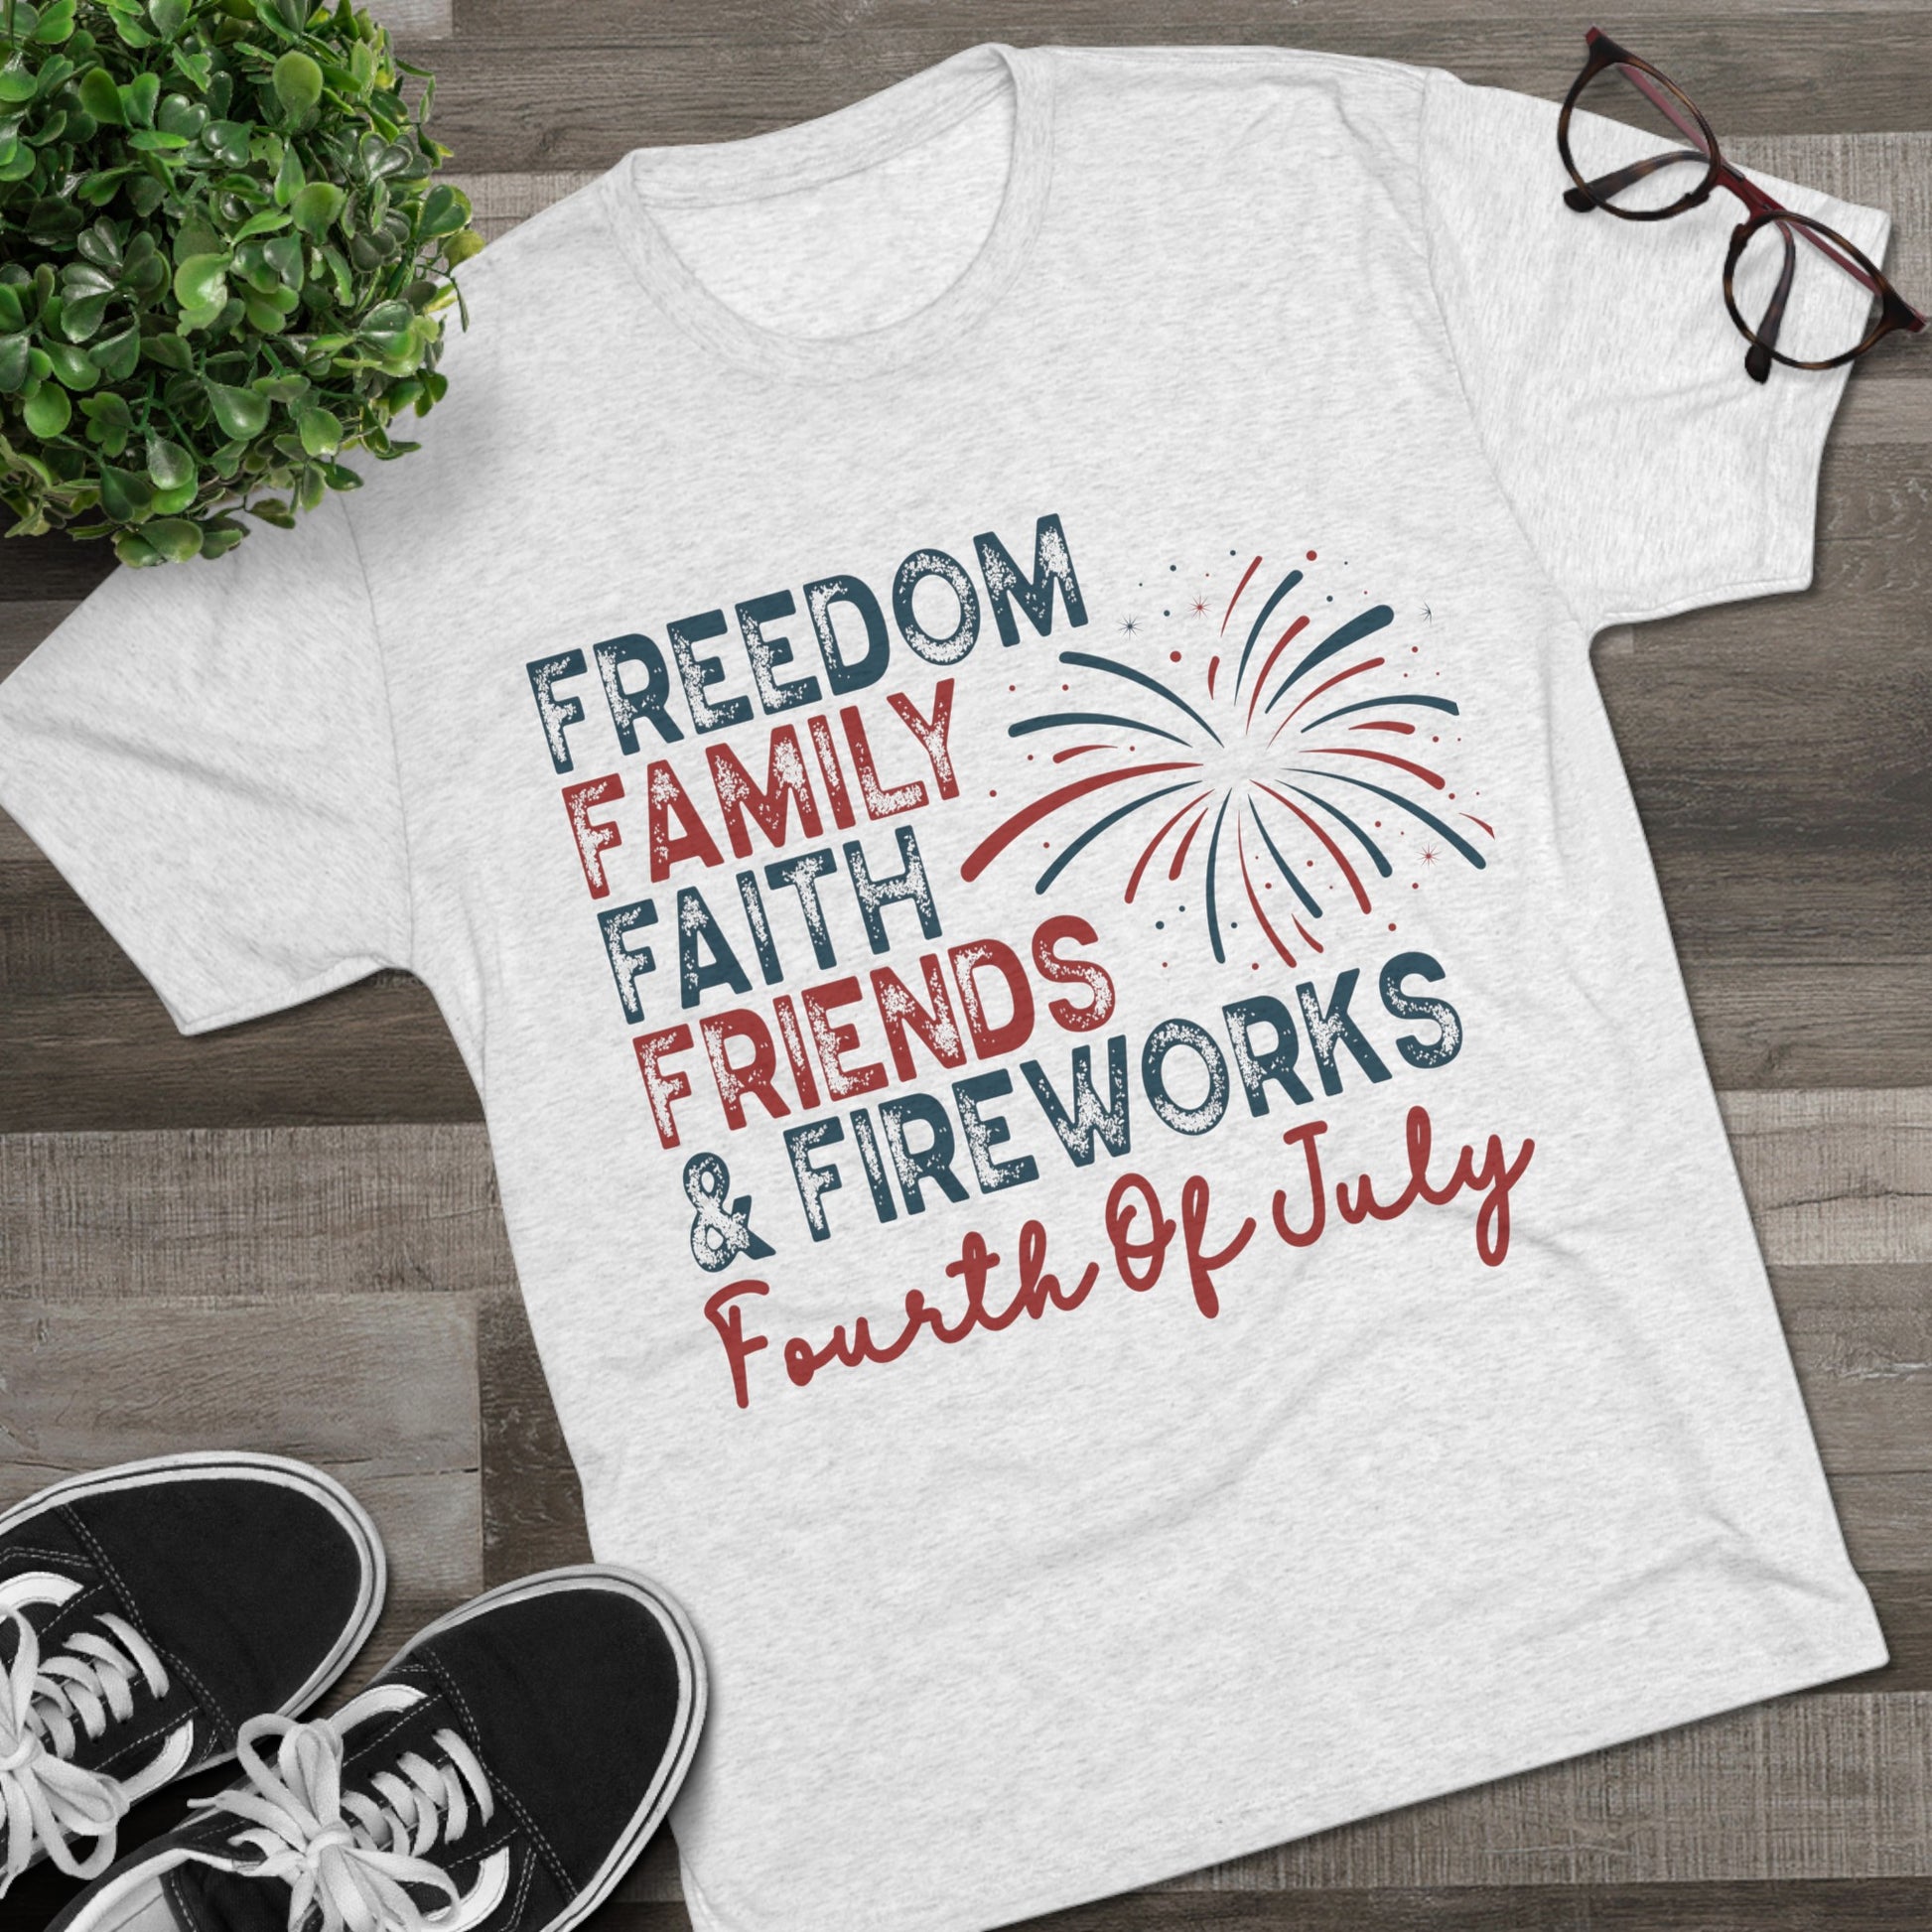 Get trendy with Freedom, Family " Unisex Tri-Blend Crew Tee - T-Shirt available at Good Gift Company. Grab yours for $21.88 today!